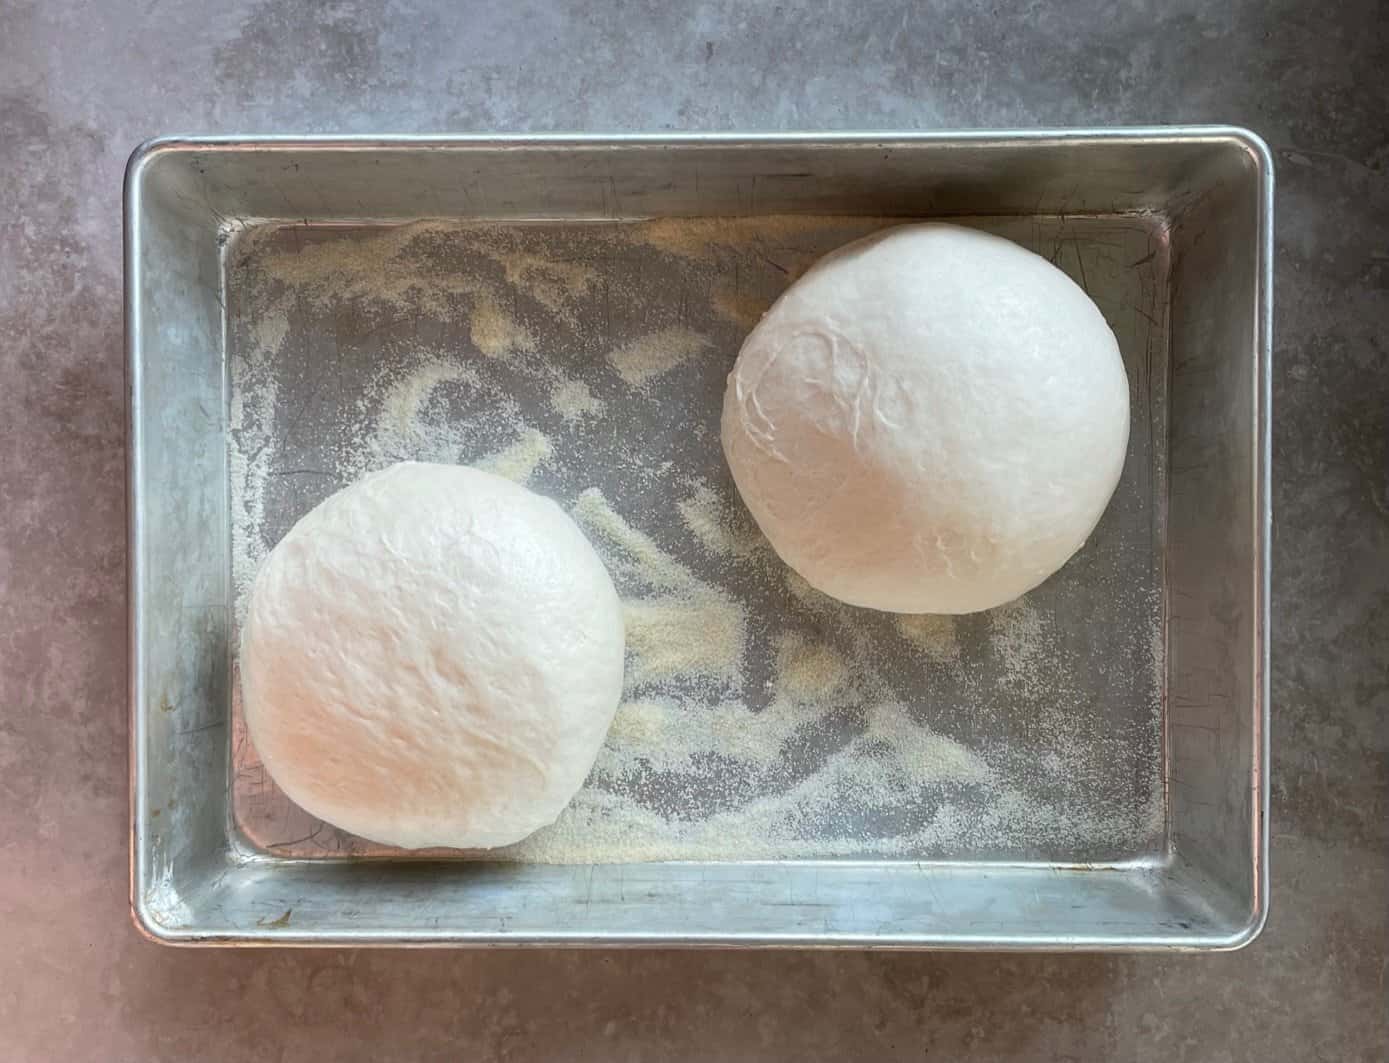 two balls of pizza dough in a baking pan ready for shaping.